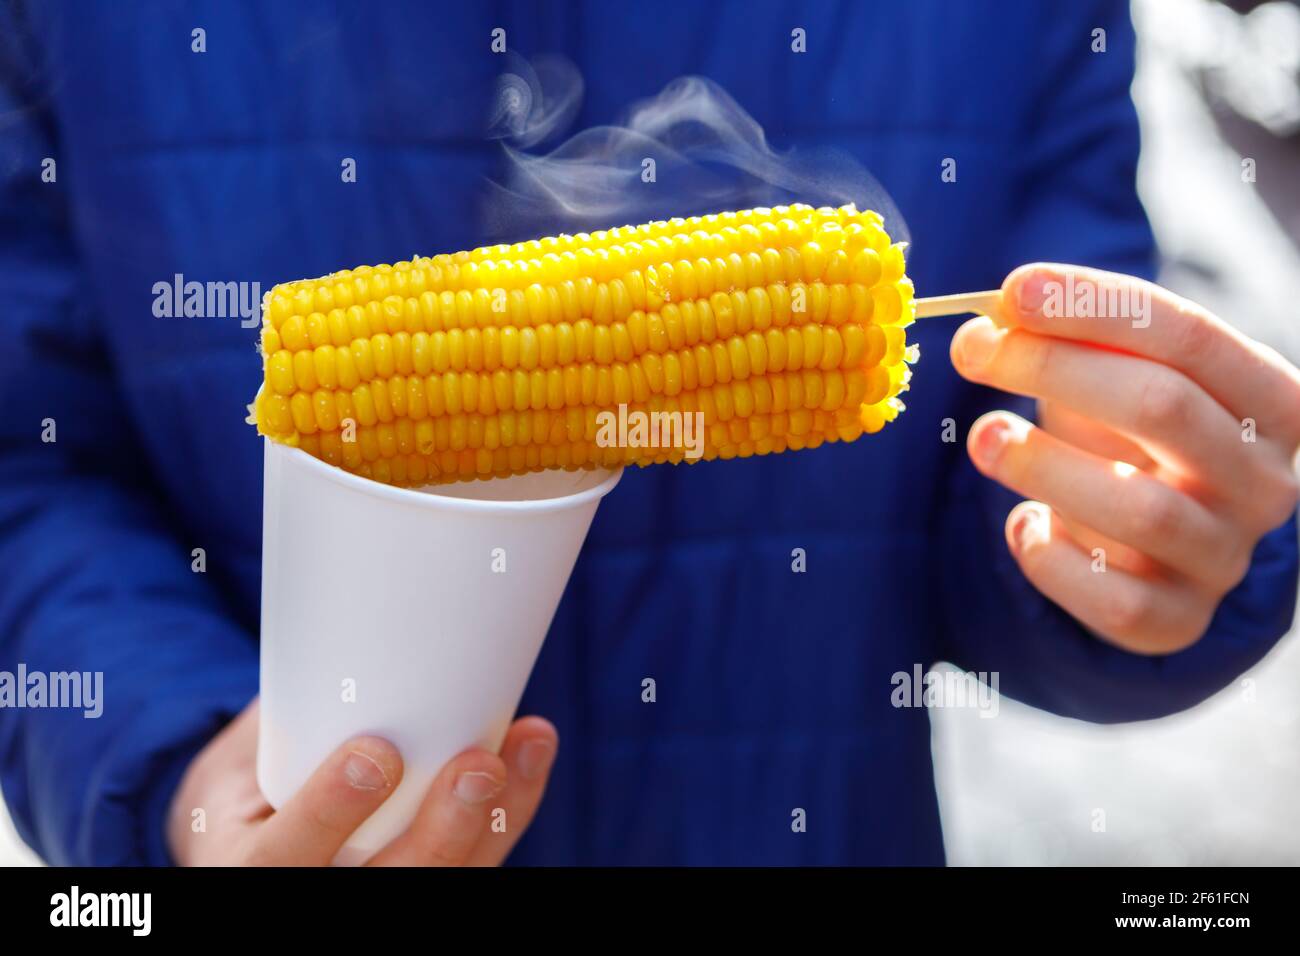 An ear of freshly boiled corn in his hands. Steam comes from the cob. Fast food concept. Stock Photo